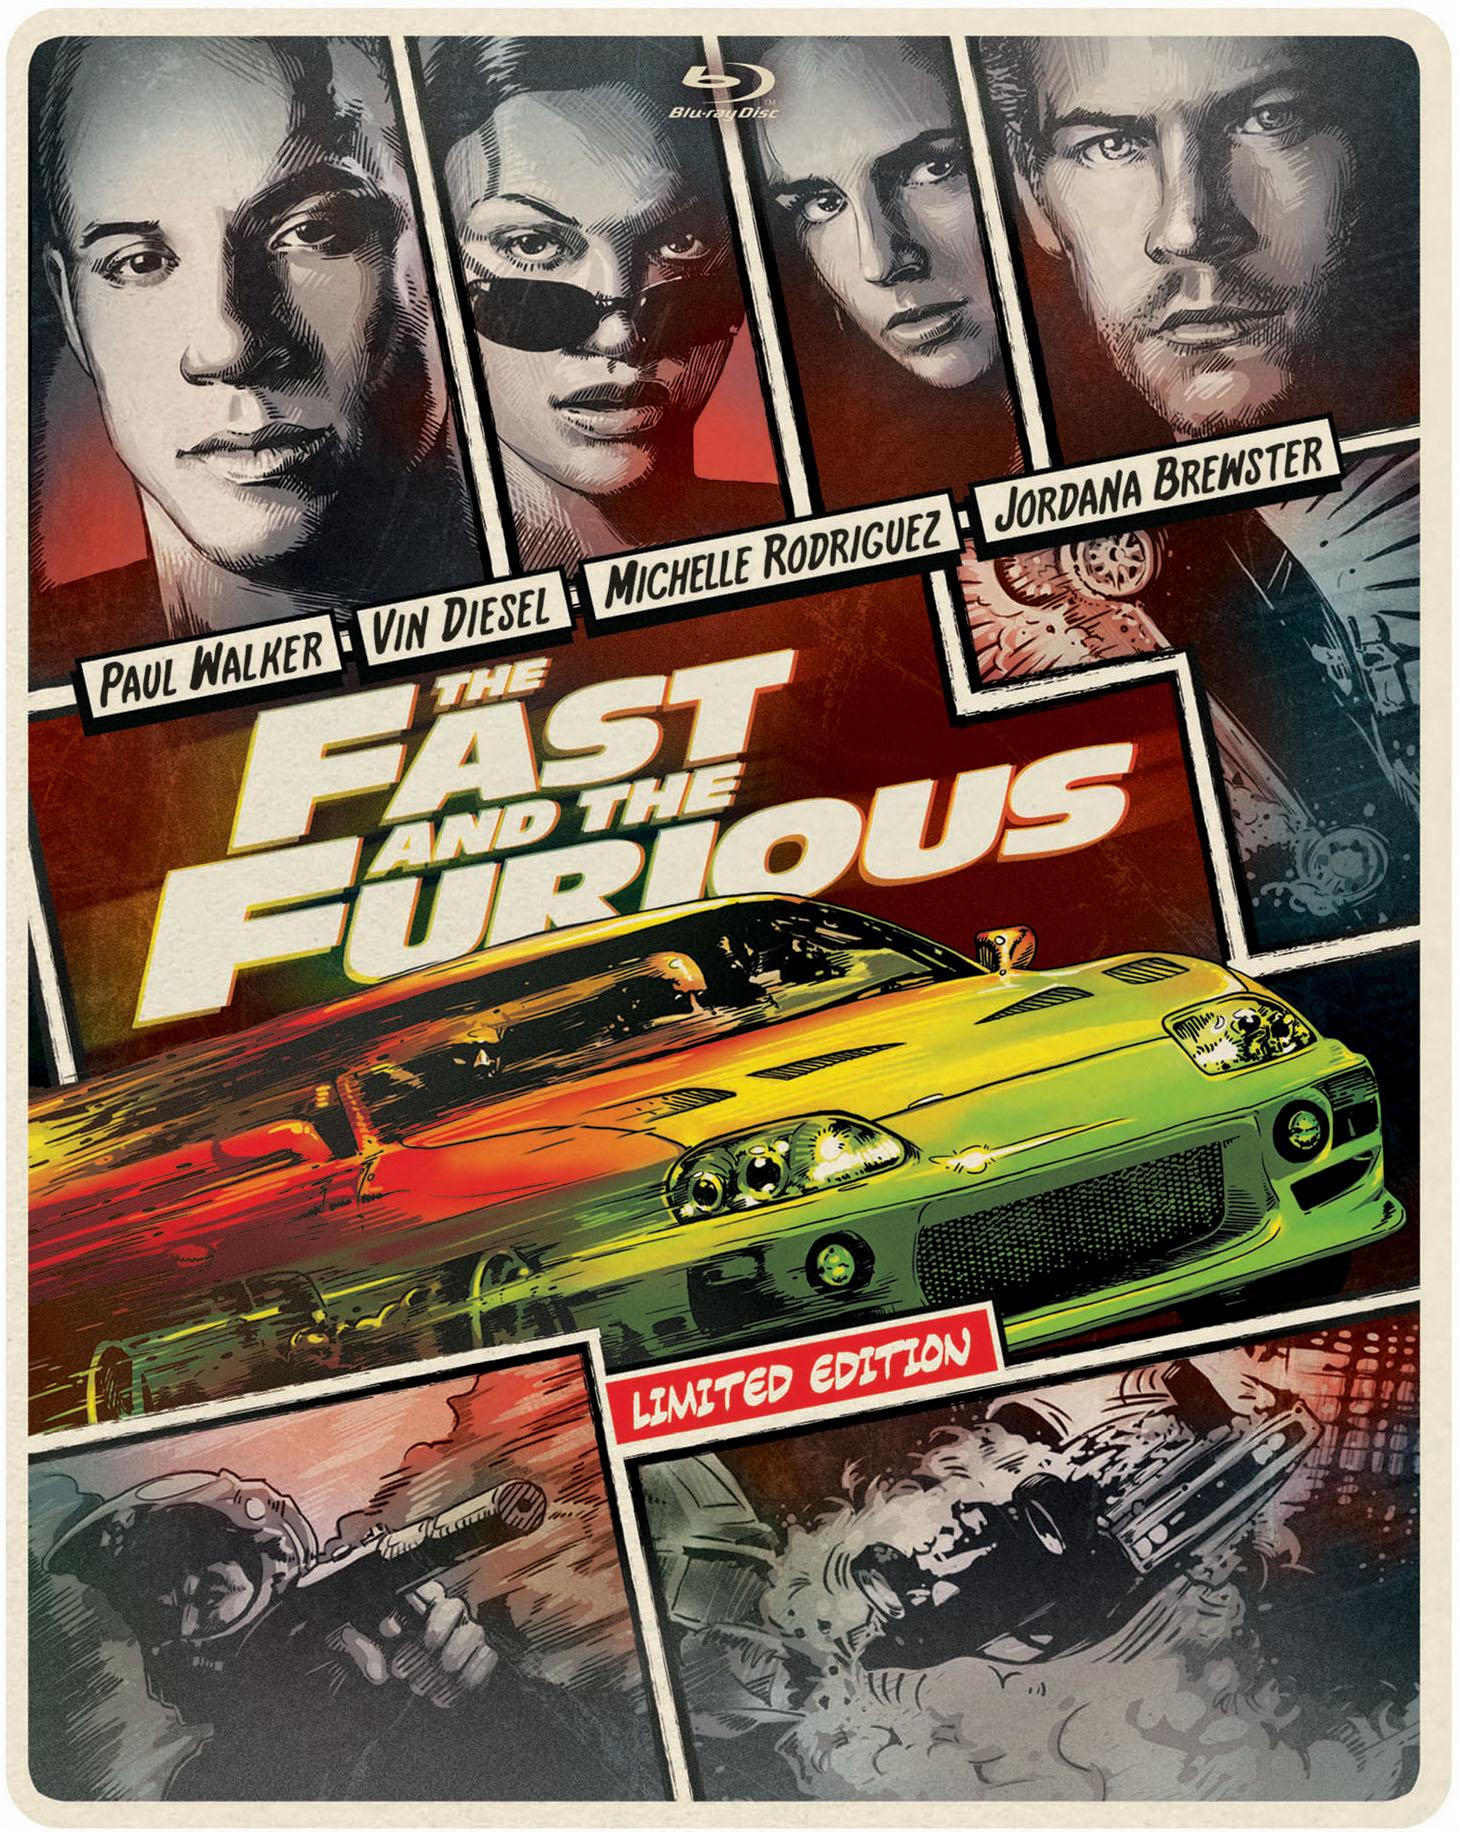 Buy The Fast and the Furious Limited Edition Steelbook Blu-ray | GRUV